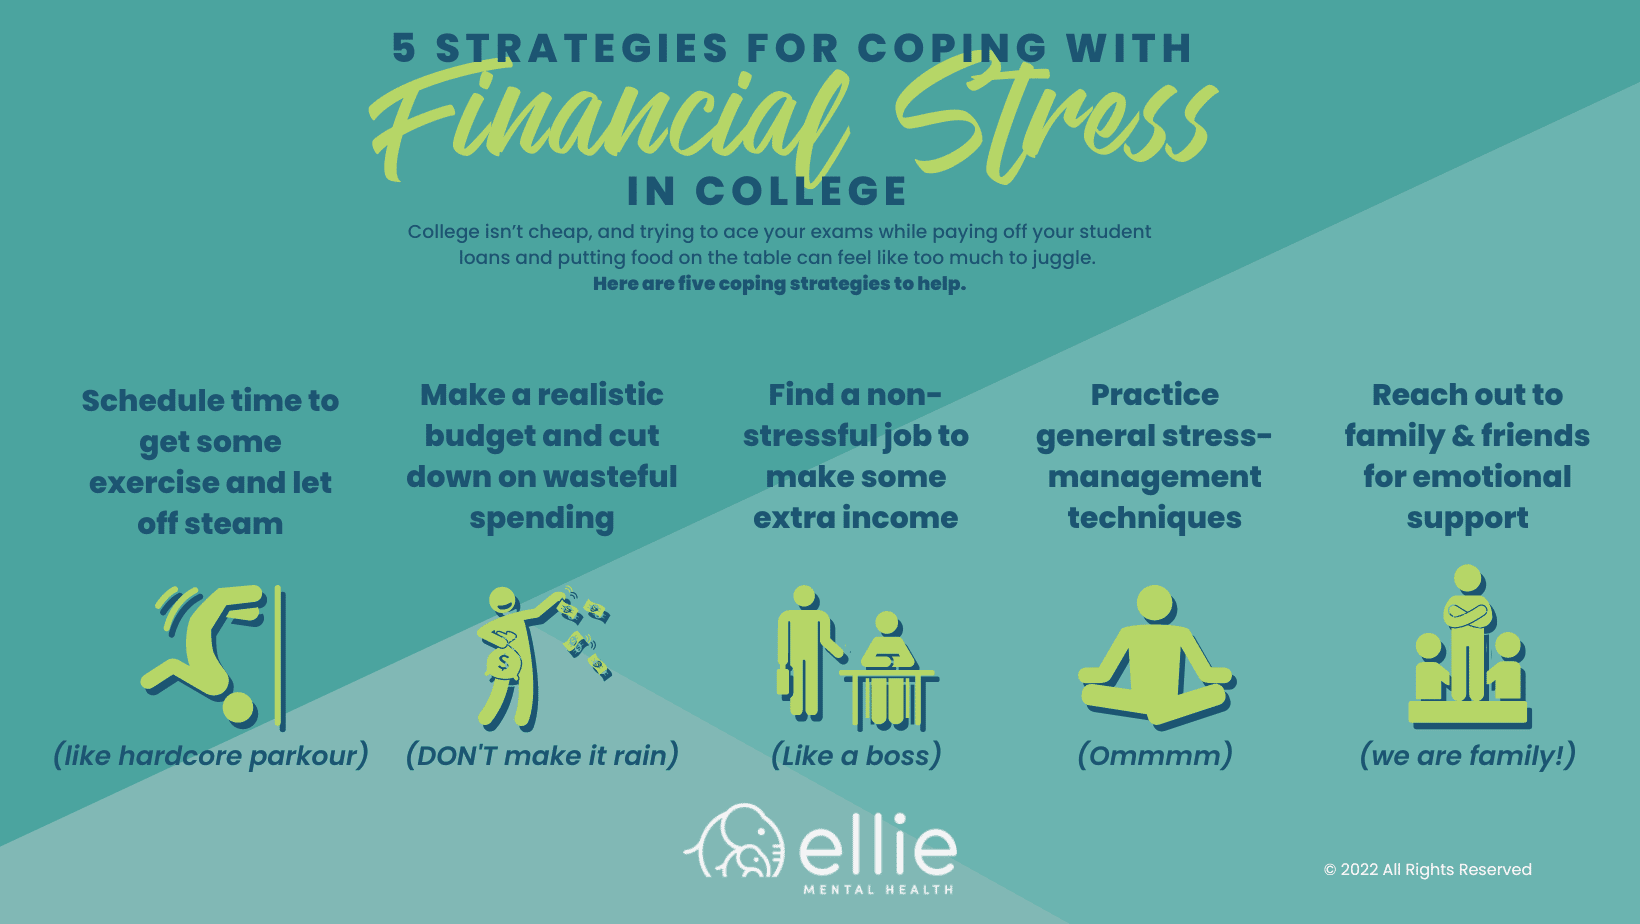 5 Strategies for Coping With Financial Stress in College Infographic